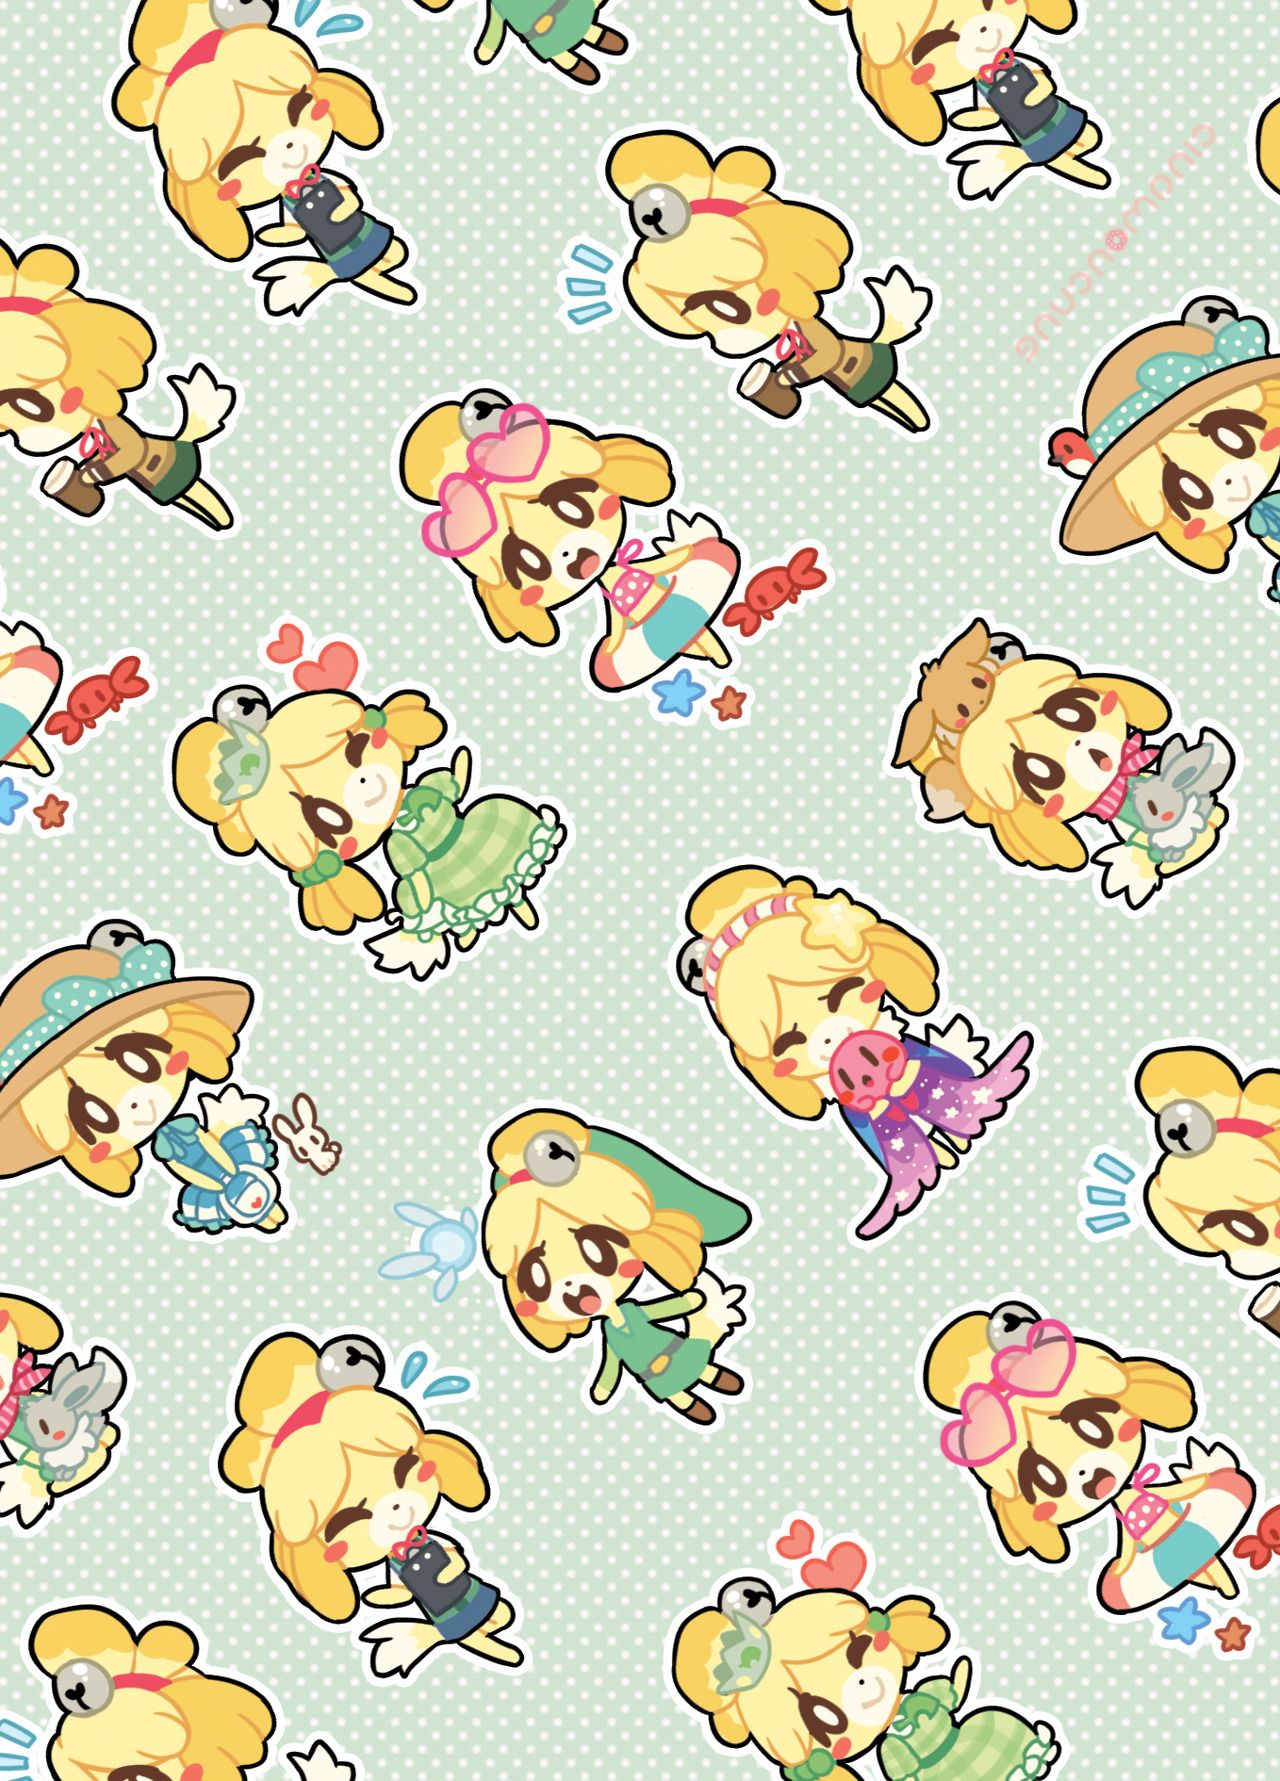 Animal crossing Isabelle wallpaper I made a while